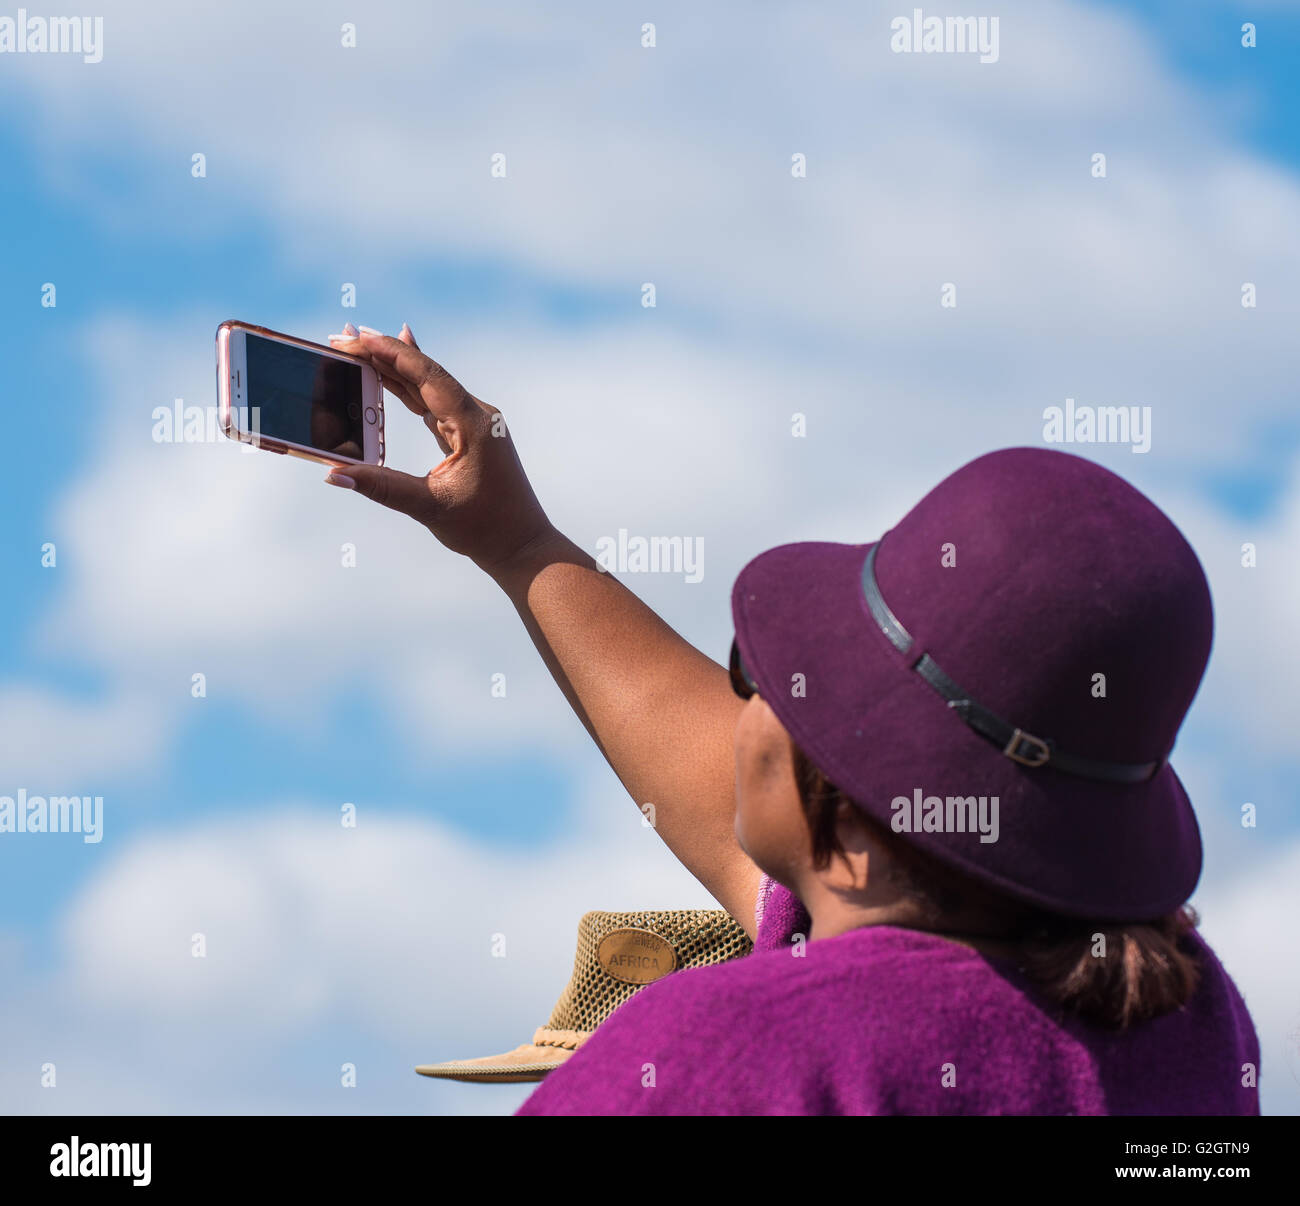 A spectator at the Lowveld Airshow taking a video with her cell phone Stock Photo